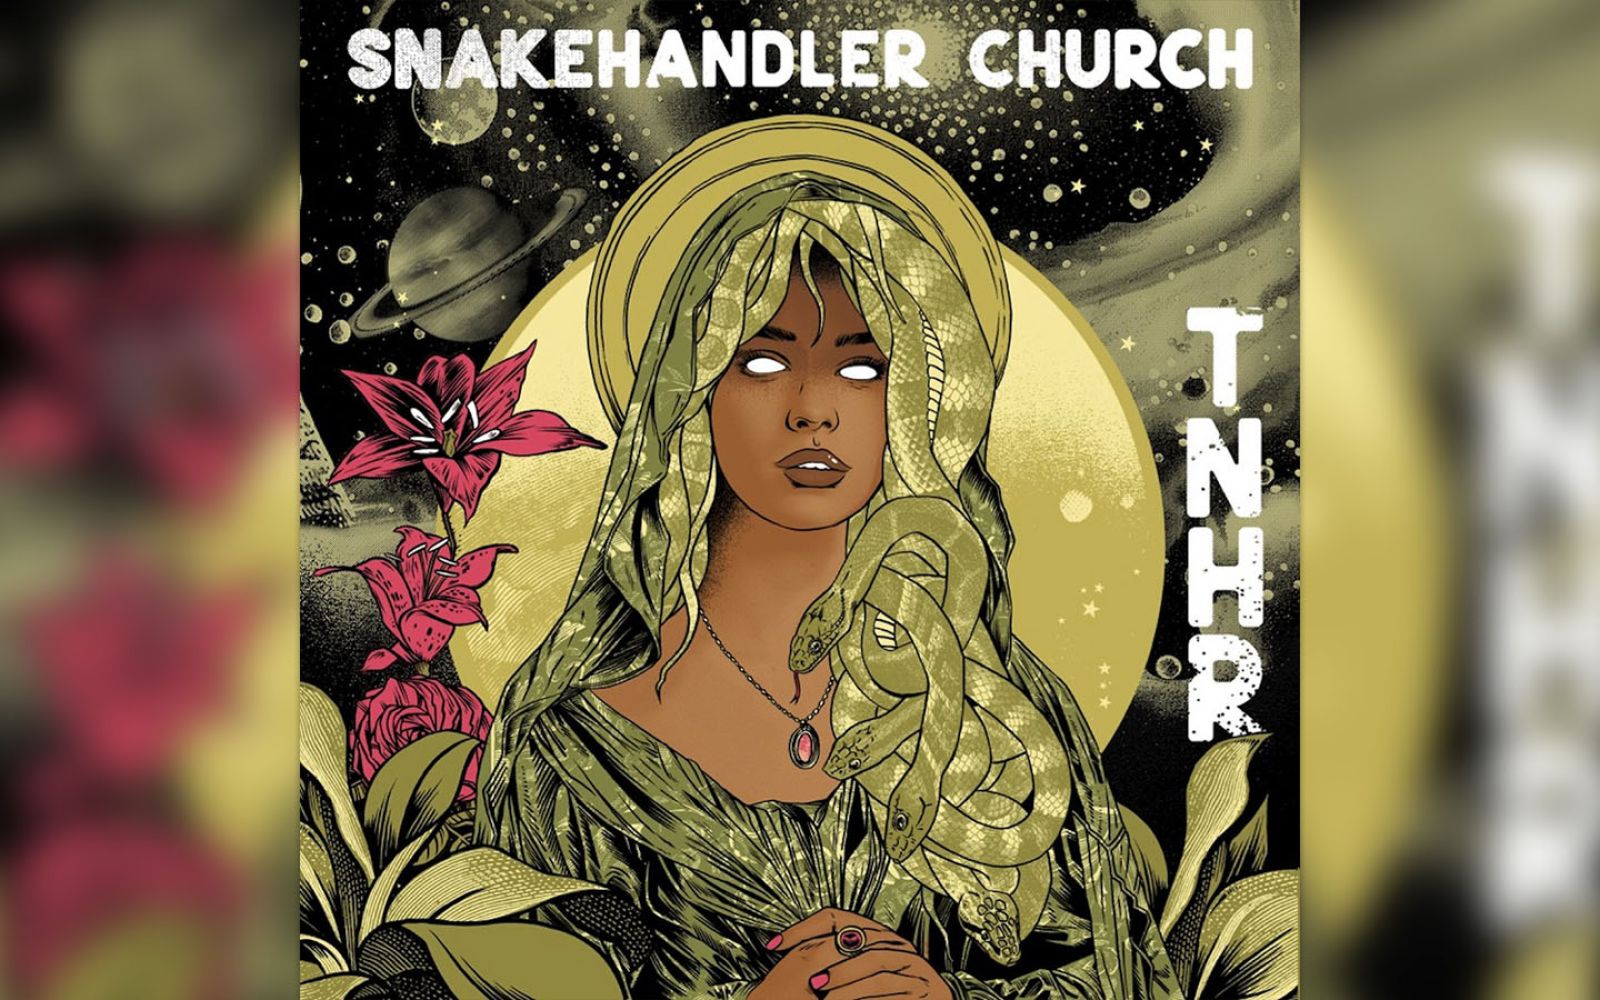 Snakehandler Church hit all the hard-rocking notes on Top Notch Heavy Rock.